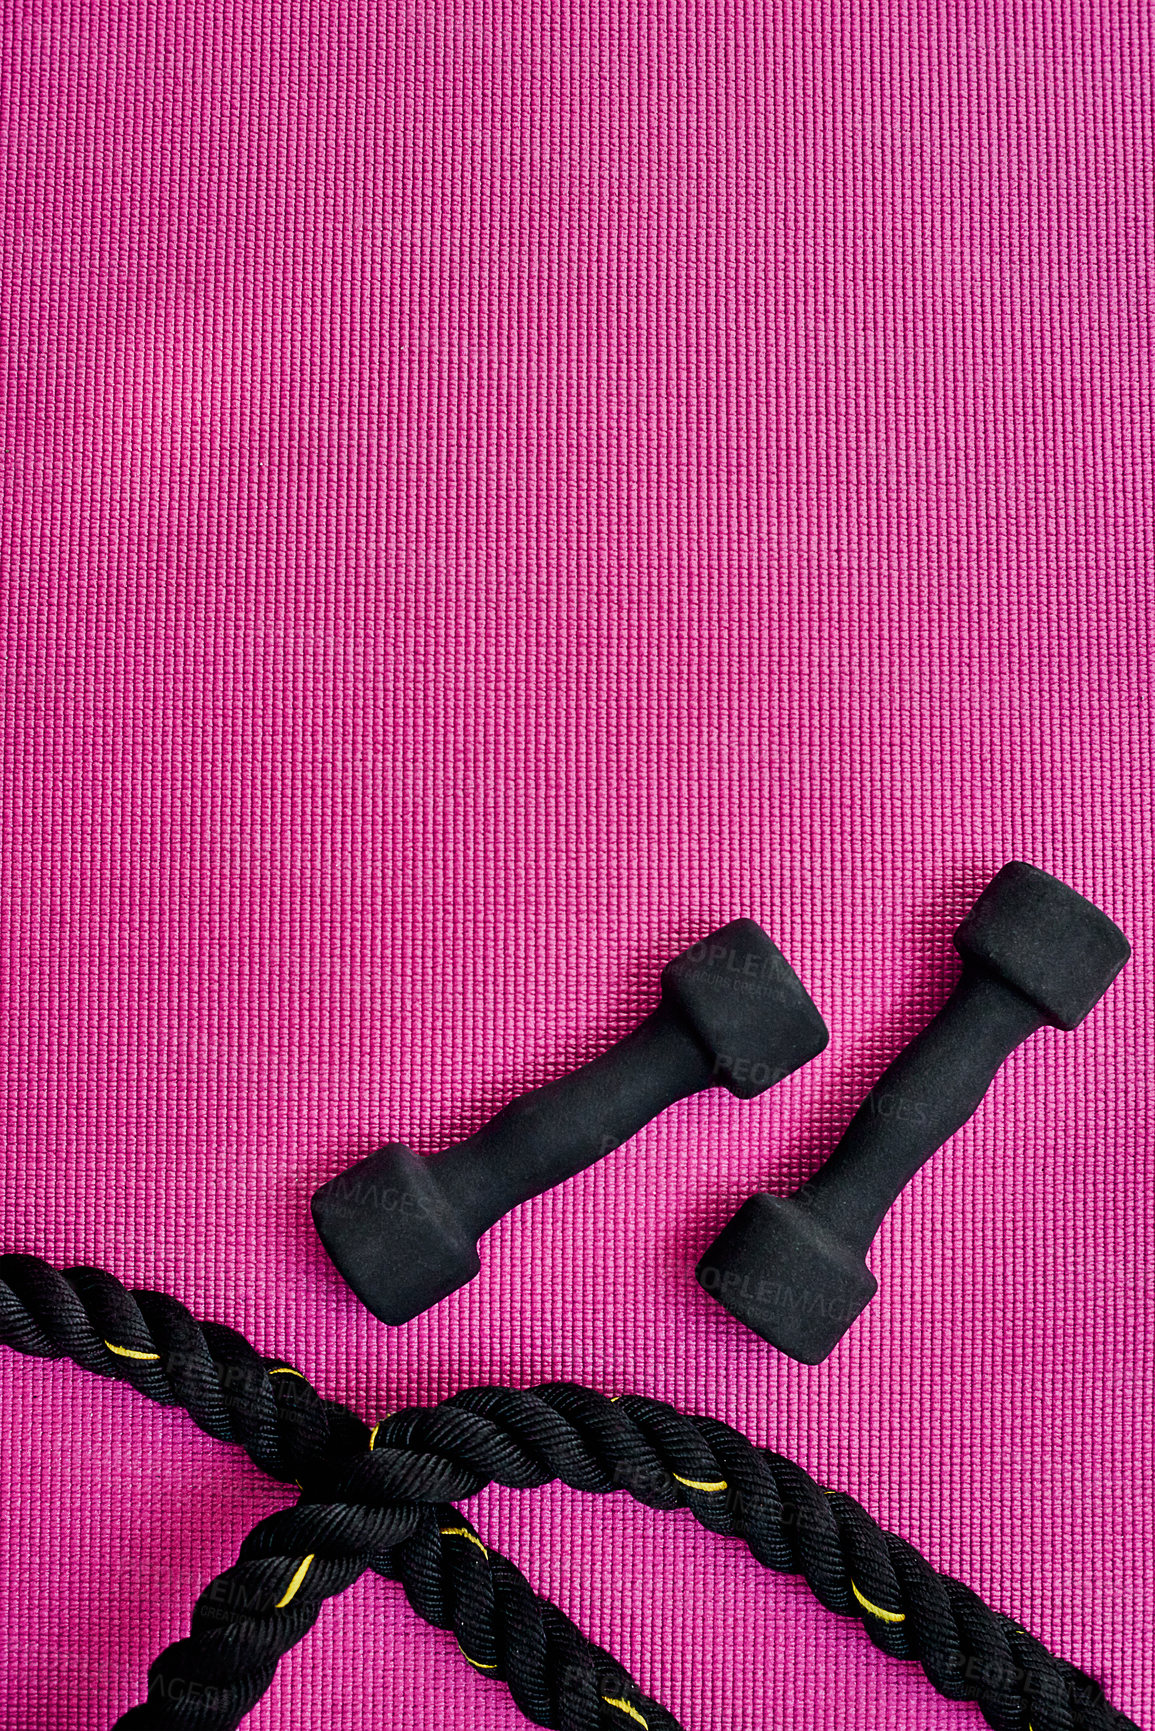 Buy stock photo High angle shot of two lightweight dumbbells and piece of rope placed on a pink background inside of a studio